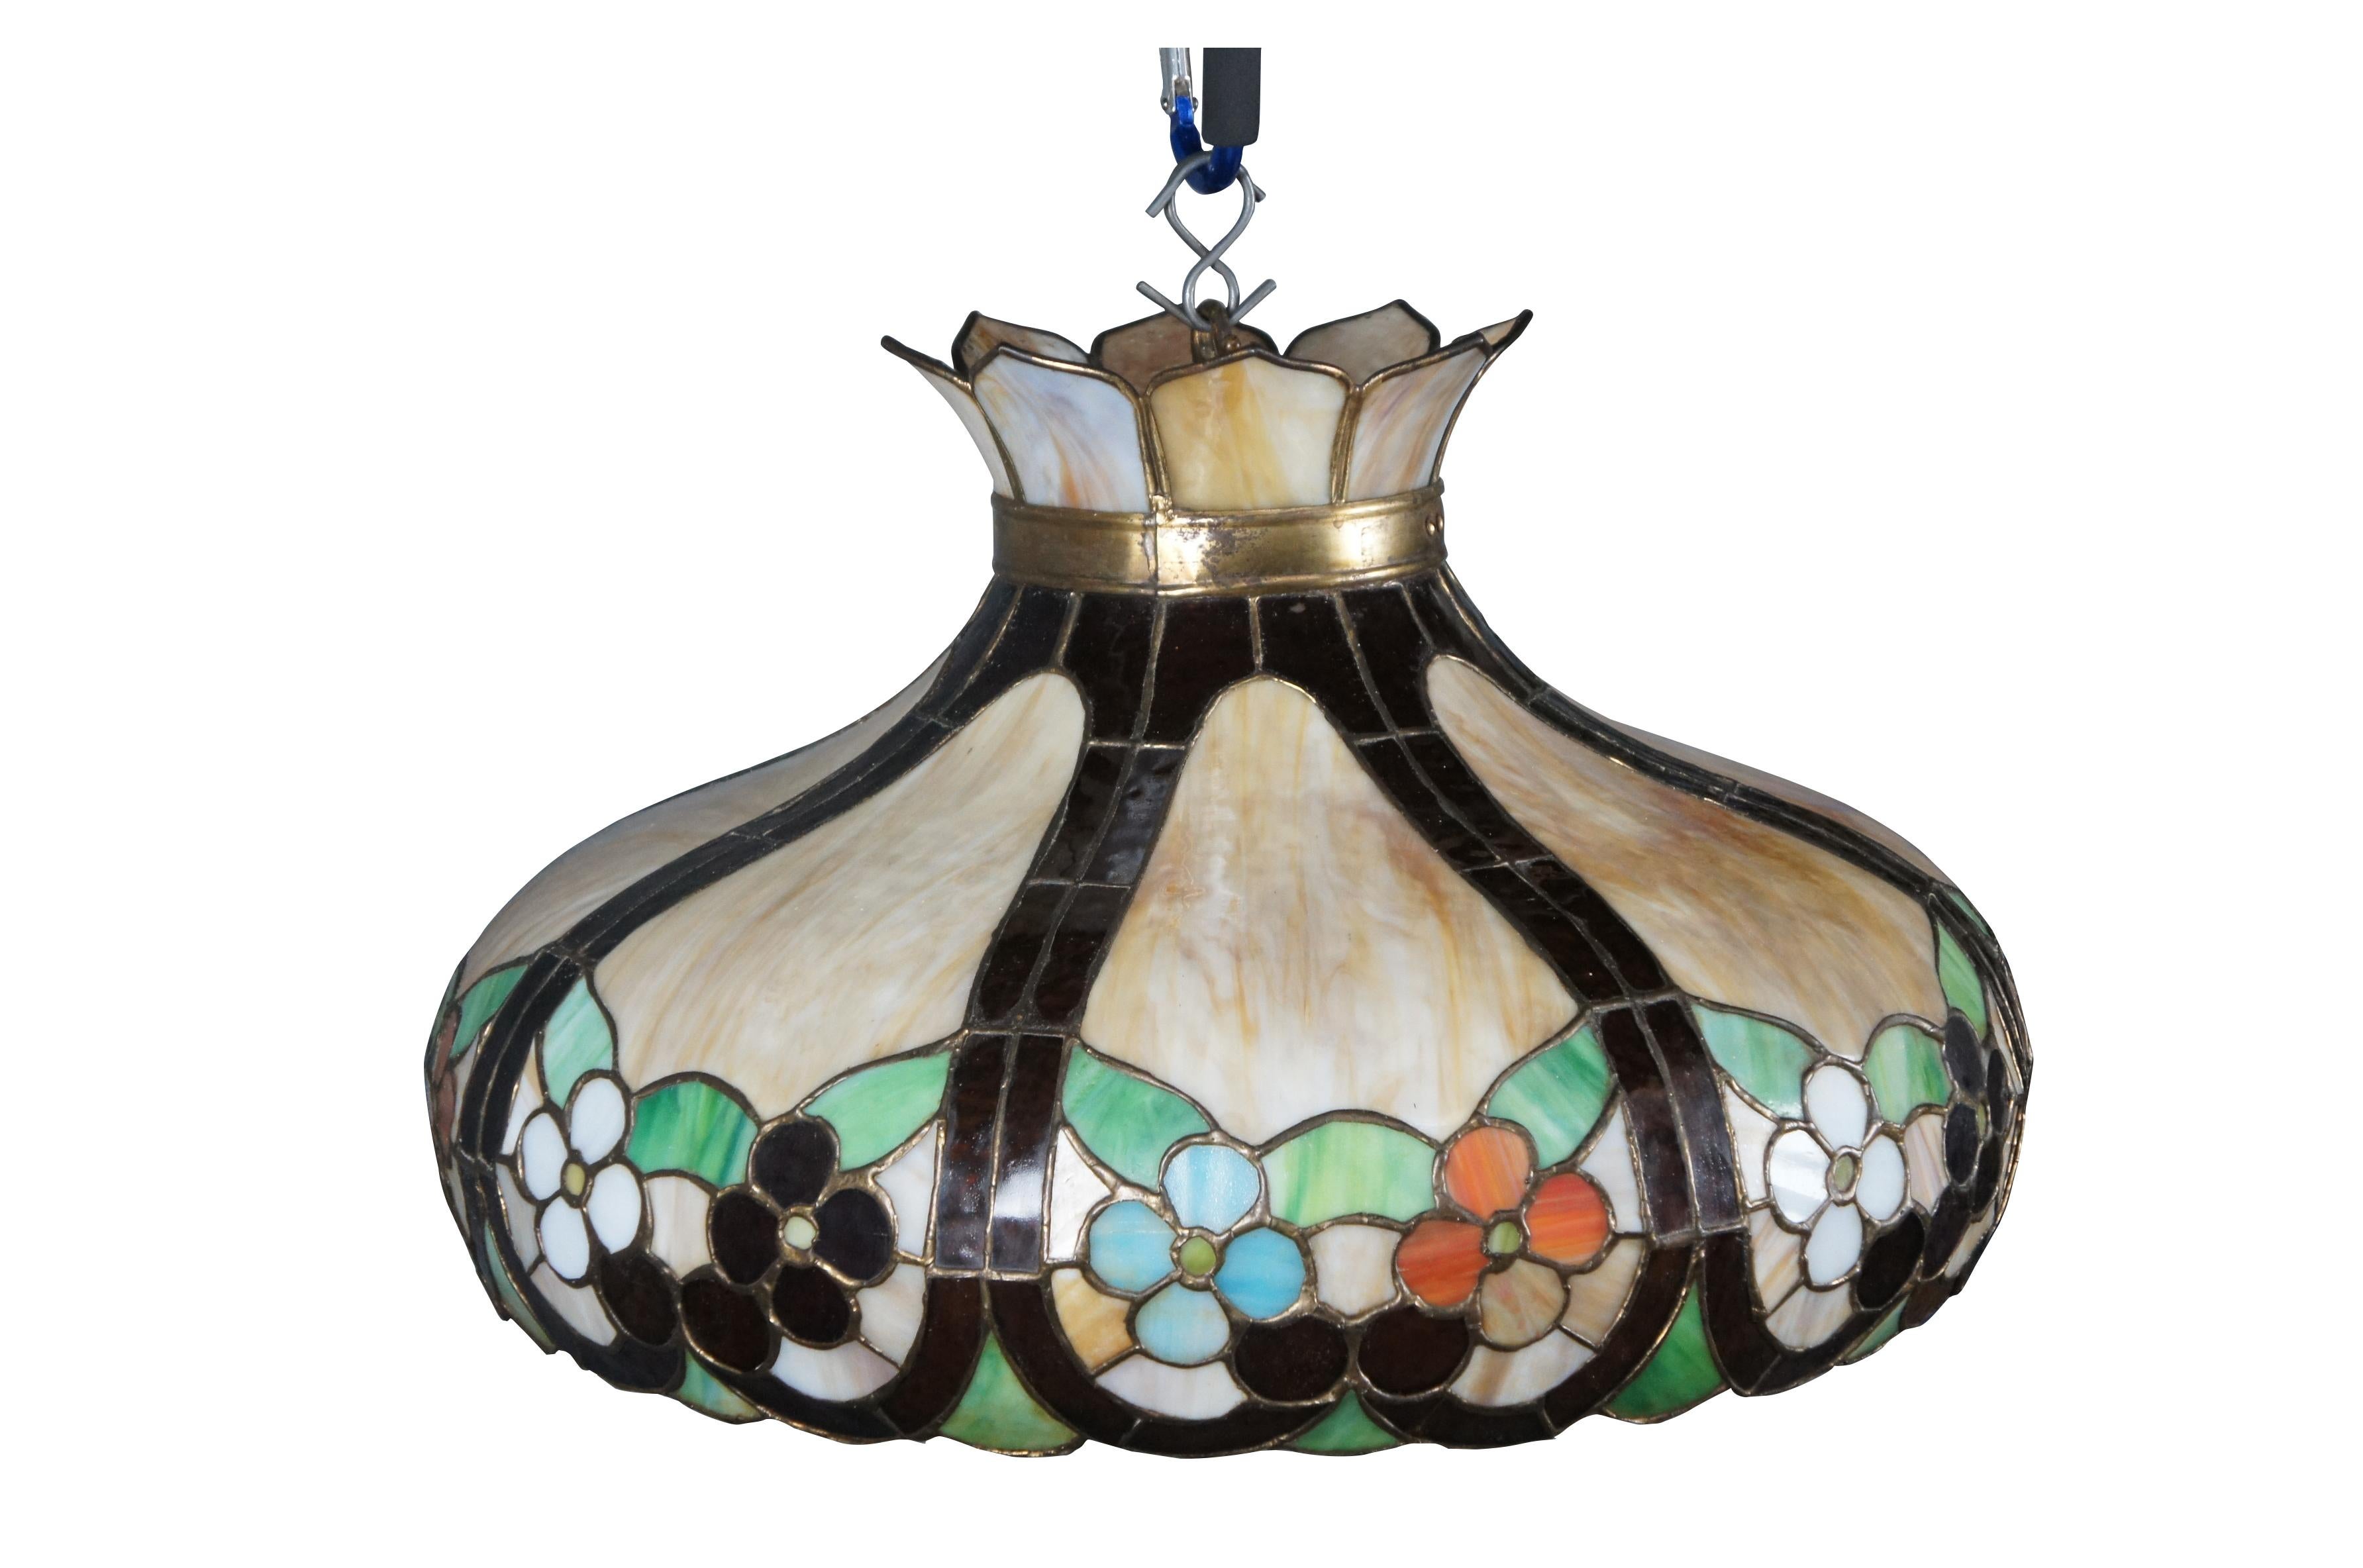 Mid to early 20th century Tiffany style slag glass / stained glass pendant light / shade / chandelier featuring a dome shape with scalloped lower edge, decorated with brown swirls cupping pairs of flowers and leaves, with petal shaped panels around